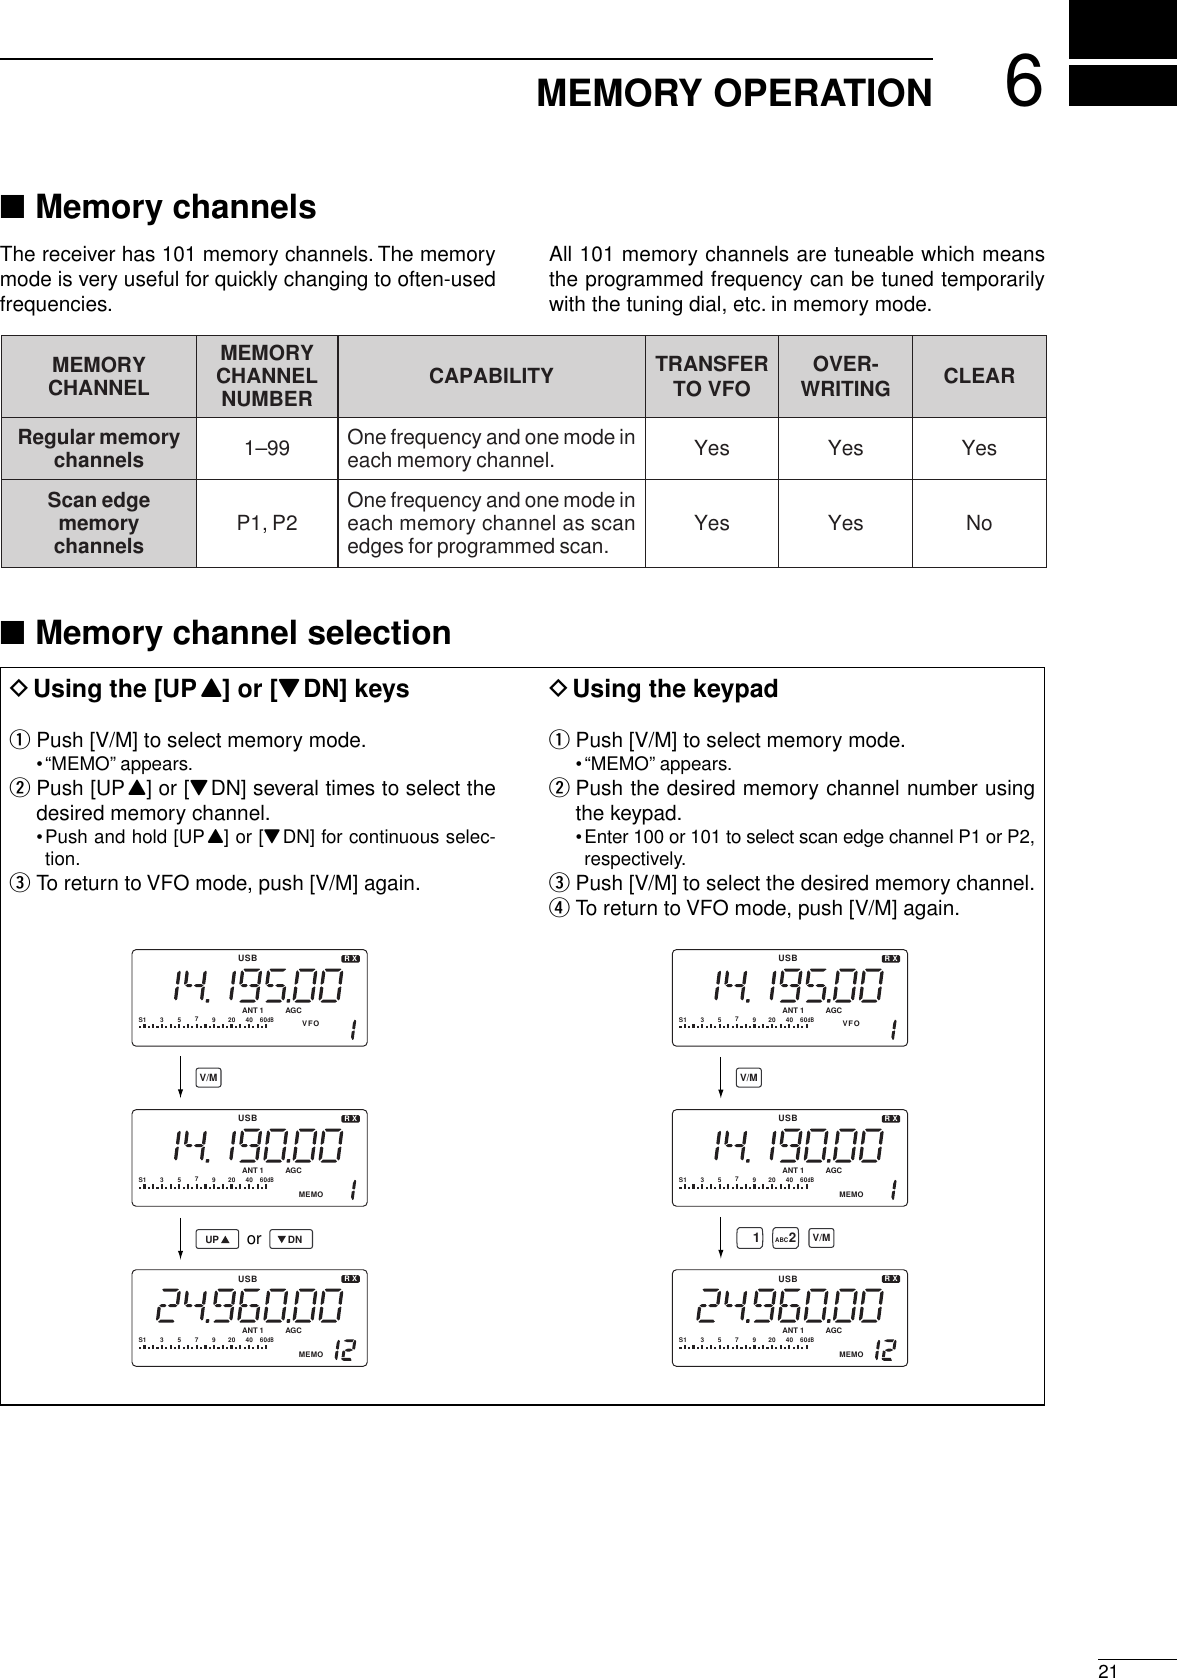 ■Memory channelsThe receiver has 101 memory channels. The memorymode is very useful for quickly changing to often-usedfrequencies.All 101 memory channels are tuneable which meansthe programmed frequency can be tuned temporarilywith the tuning dial, etc. in memory mode.■Memory channel selection621MEMORY OPERATIONMEMORYCHANNELMEMORYCHANNELNUMBER CAPABILITY TRANSFERTO VFO OVER-WRITING CLEARRegular memorychannels 1–99 One frequency and one mode ineach memory channel. Yes Yes YesScan edgememorychannels P1, P2 One frequency and one mode ineach memory channel as scanedges for programmed scan. Yes Yes NoDUsing the [UPY] or [ZDN] keysqPush [V/M] to select memory mode.•“MEMO” appears.wPush [UPY] or [ZDN] several times to select thedesired memory channel.•Push and hold [UPY] or [ZDN] for continuous selec-tion.eTo return to VFO mode, push [V/M] again.DUsing the keypadqPush [V/M] to select memory mode.•“MEMO” appears.wPush the desired memory channel number usingthe keypad.•Enter 100 or 101 to select scan edge channel P1 or P2,respectively.ePush [V/M] to select the desired memory channel.rTo return to VFO mode, push [V/M] again.USB R XS1 3 57920 40 60dBAGCANTMEMO1USB R XS1 3 57920 40 60dBAGCANTMEMO1USB R XS1 3 57920 40 60dBAGCANTVFO1UP DNorV/MUSB R XS1 3 57920 40 60dBAGCANTMEMO1USB R XS1 3 57920 40 60dBAGCANTMEMO1USB R XS1 3 57920 40 60dBAGCANTVFO11 2ABCV/MV/M